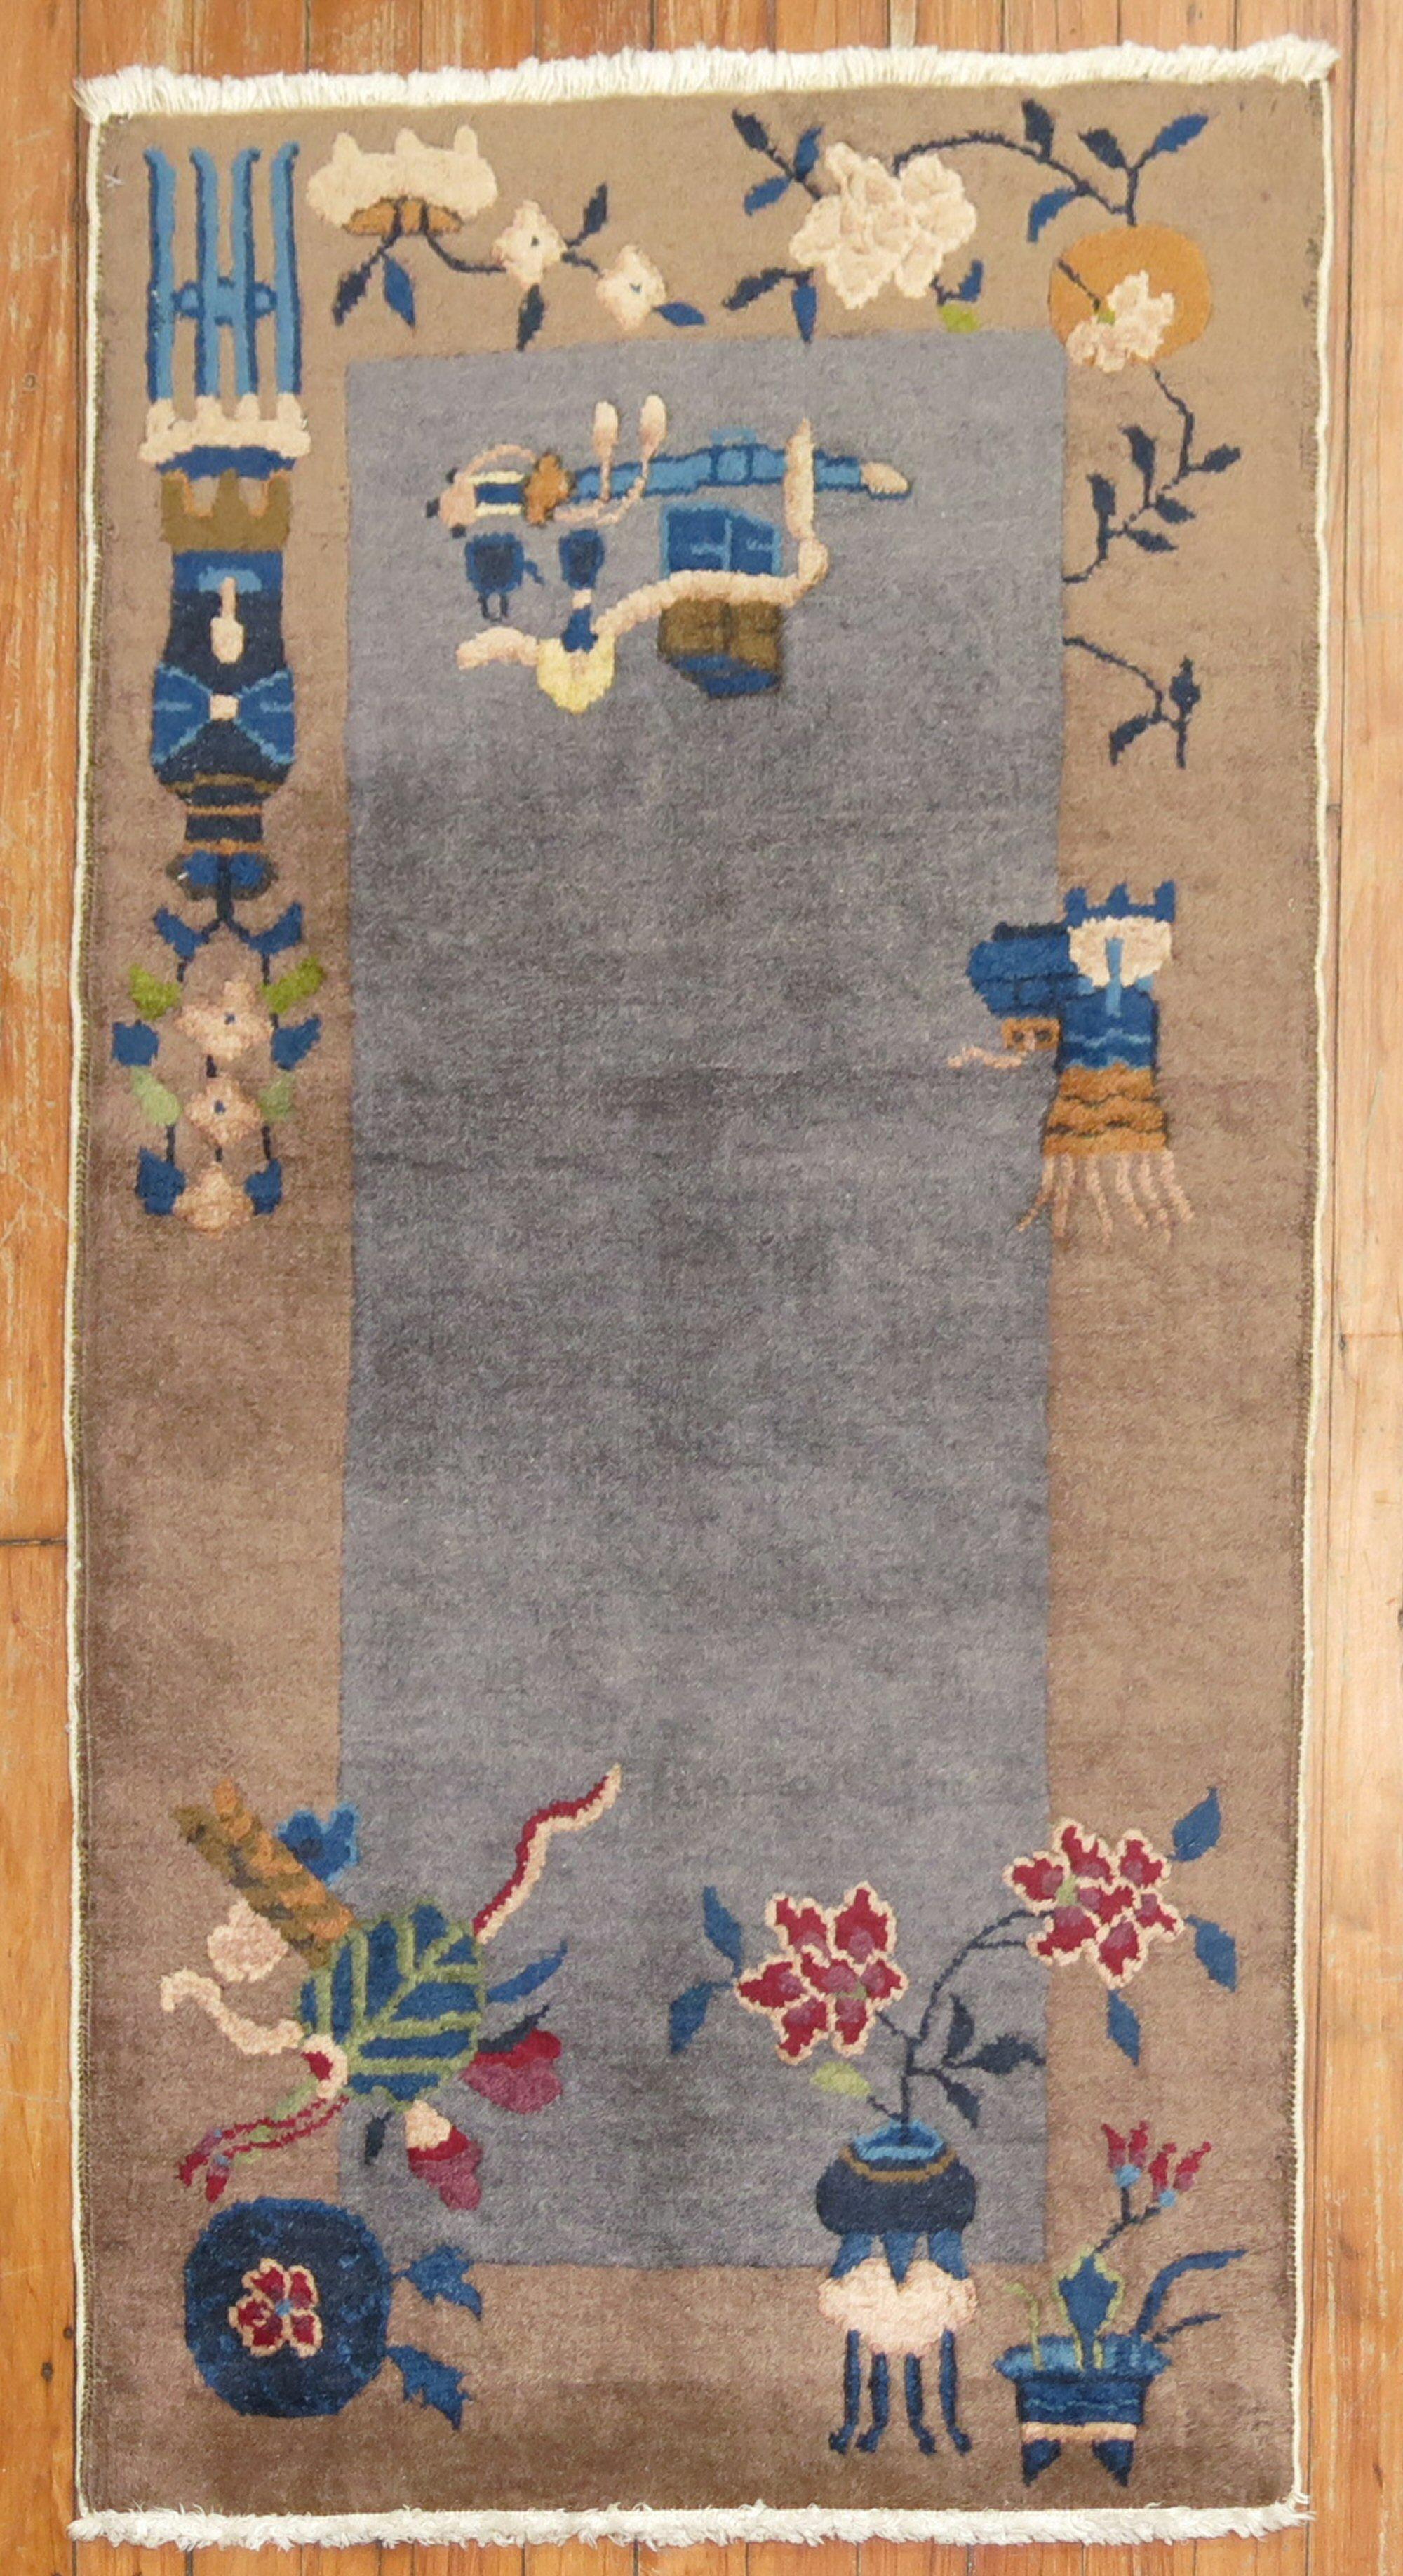 Scatter size Gray Chinese Art Deco rug.

Measures: 2'1'' x 4'

Chinese Art Deco rugs are known for their striking mix of asymmetrical patterns, vibrant colors, and traditional motifs, which are is bold, beautiful, and quite rare. Woven between